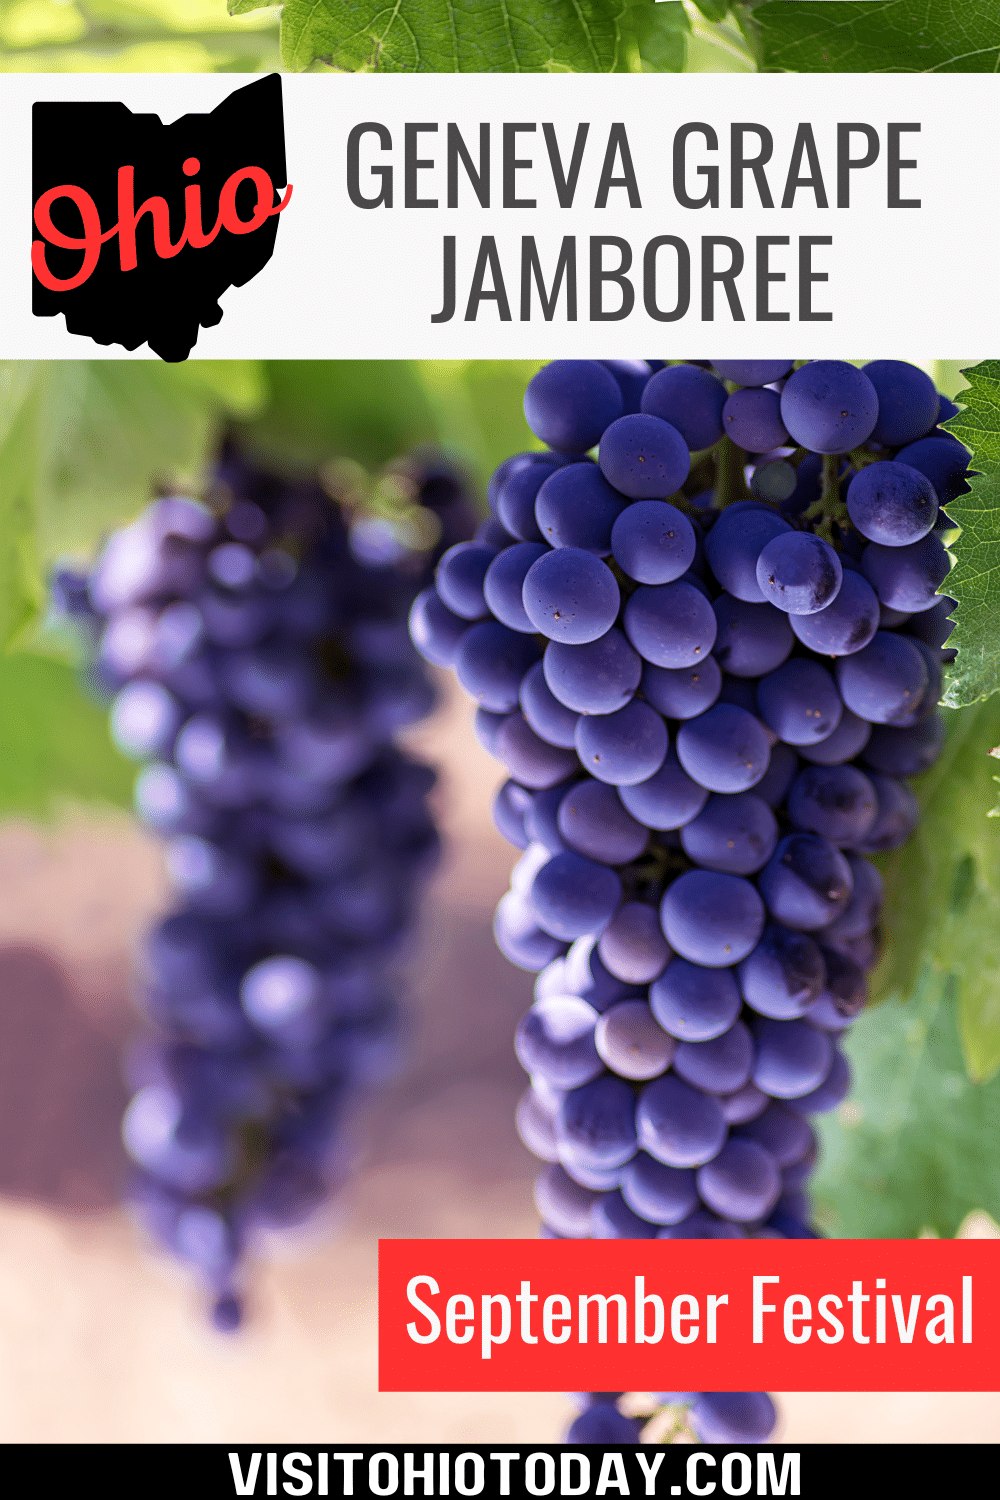 The Geneva Grape Jamboree takes place on the last full weekend in September - 23 and 24, 2023. A celebration of the grape harvest in the Geneva area where more than 50% of Ohio’s grapes are grown. Grapes, grape juice, grape pies, wine, and various other products are available for visitors to taste.